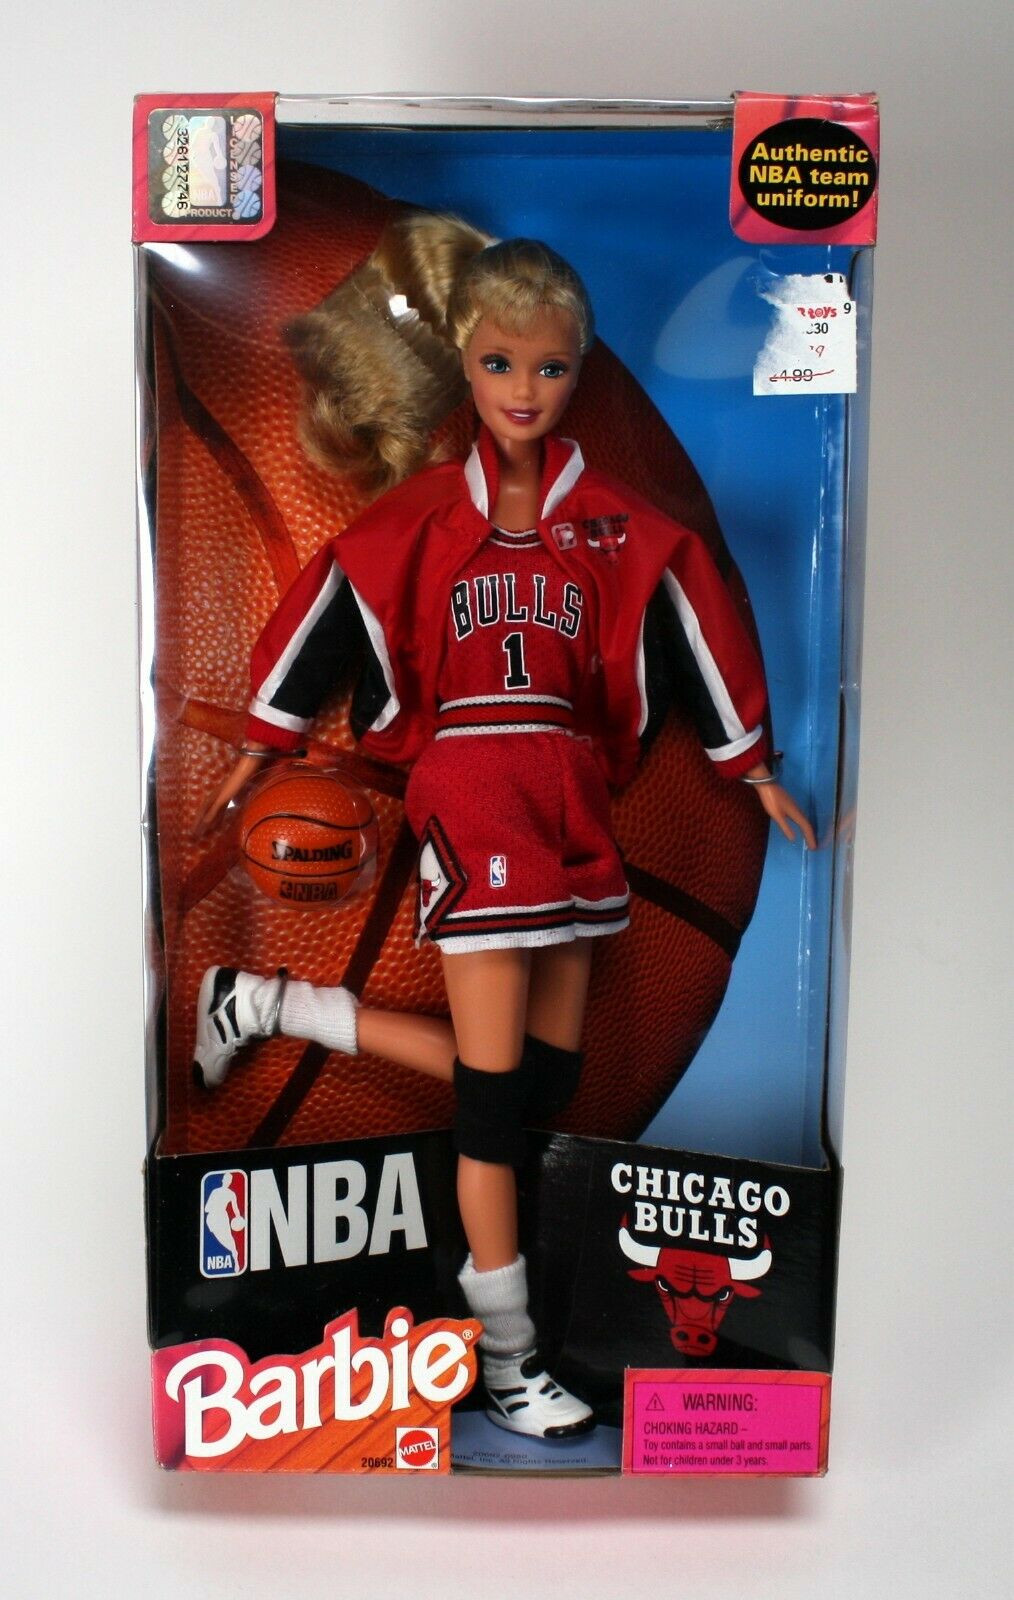 Nba Barbie Chicago Bulls Doll Is New - M.i.b. - Top Of Box Open - Some Box Wear.